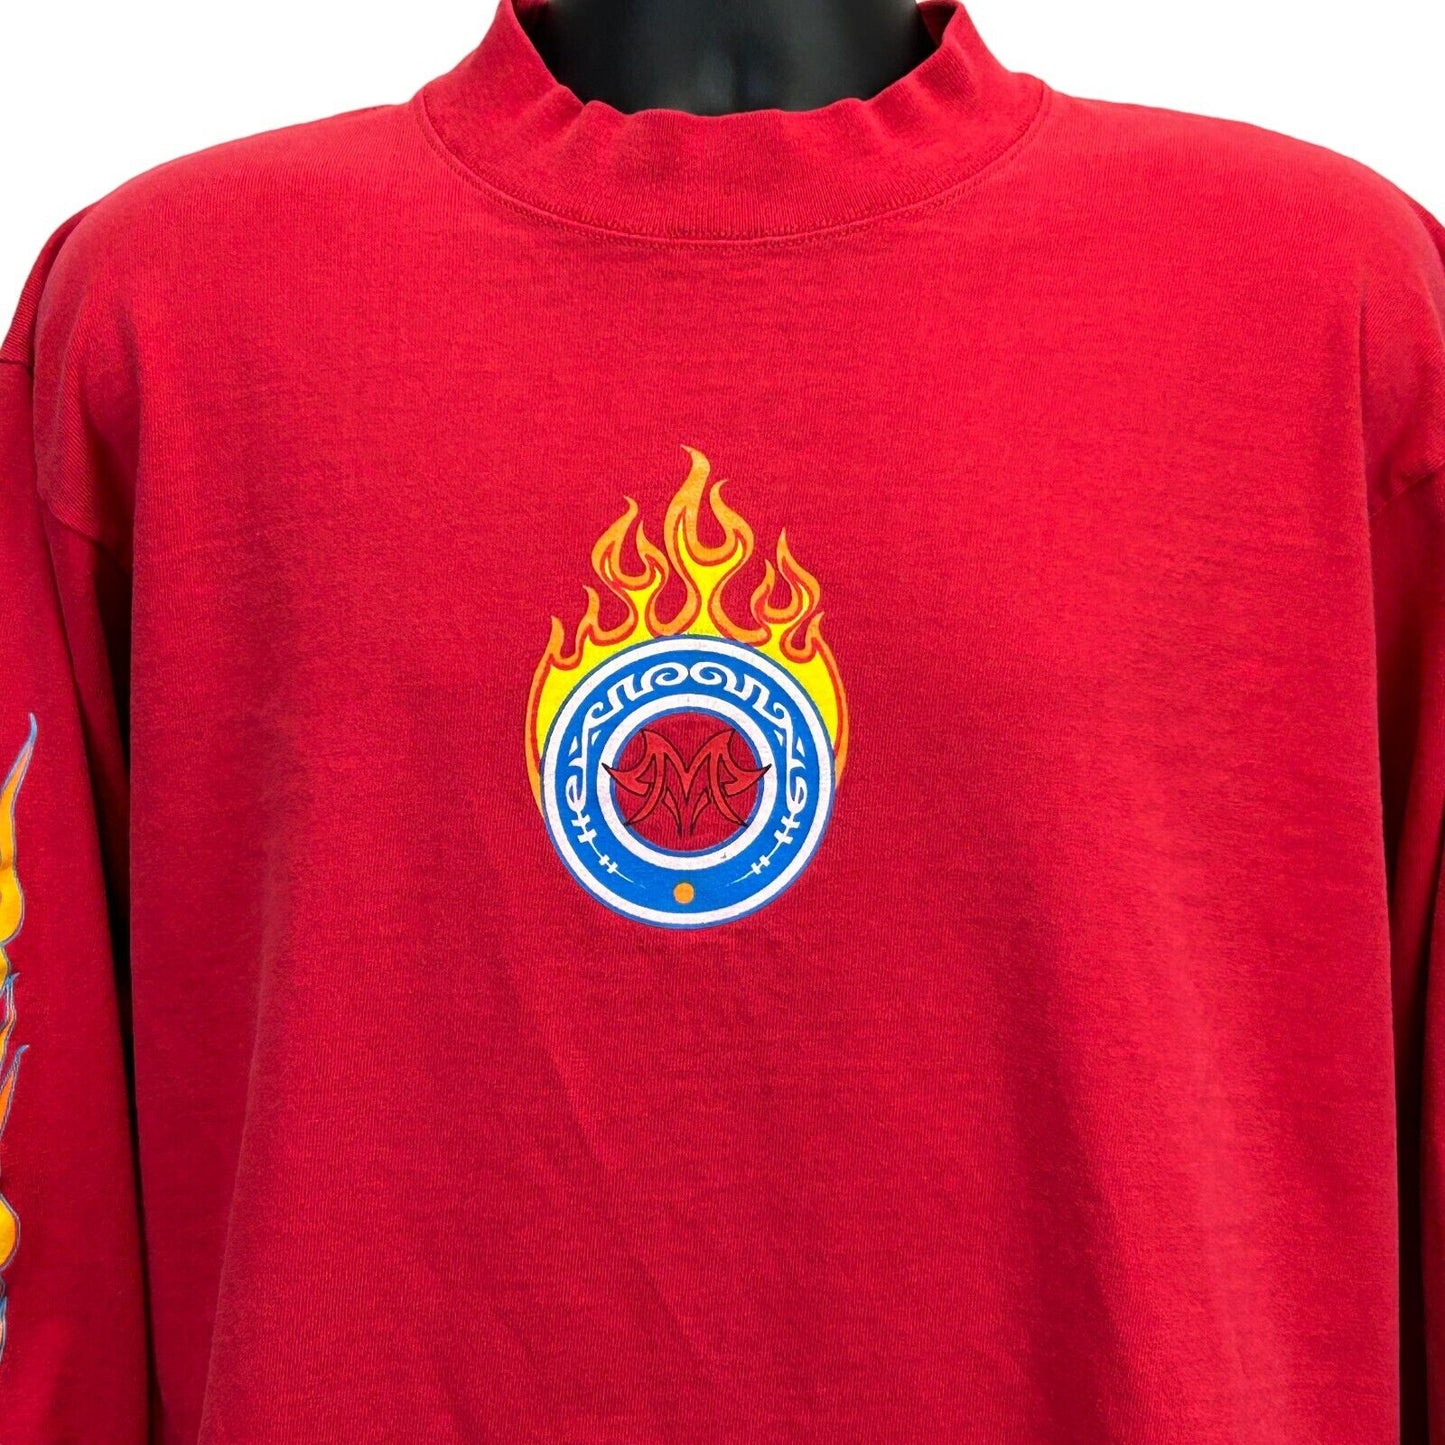 Fire Flames Vintage 90s T Shirt Streetwear Red Long Sleeve Made In USA Tee Large